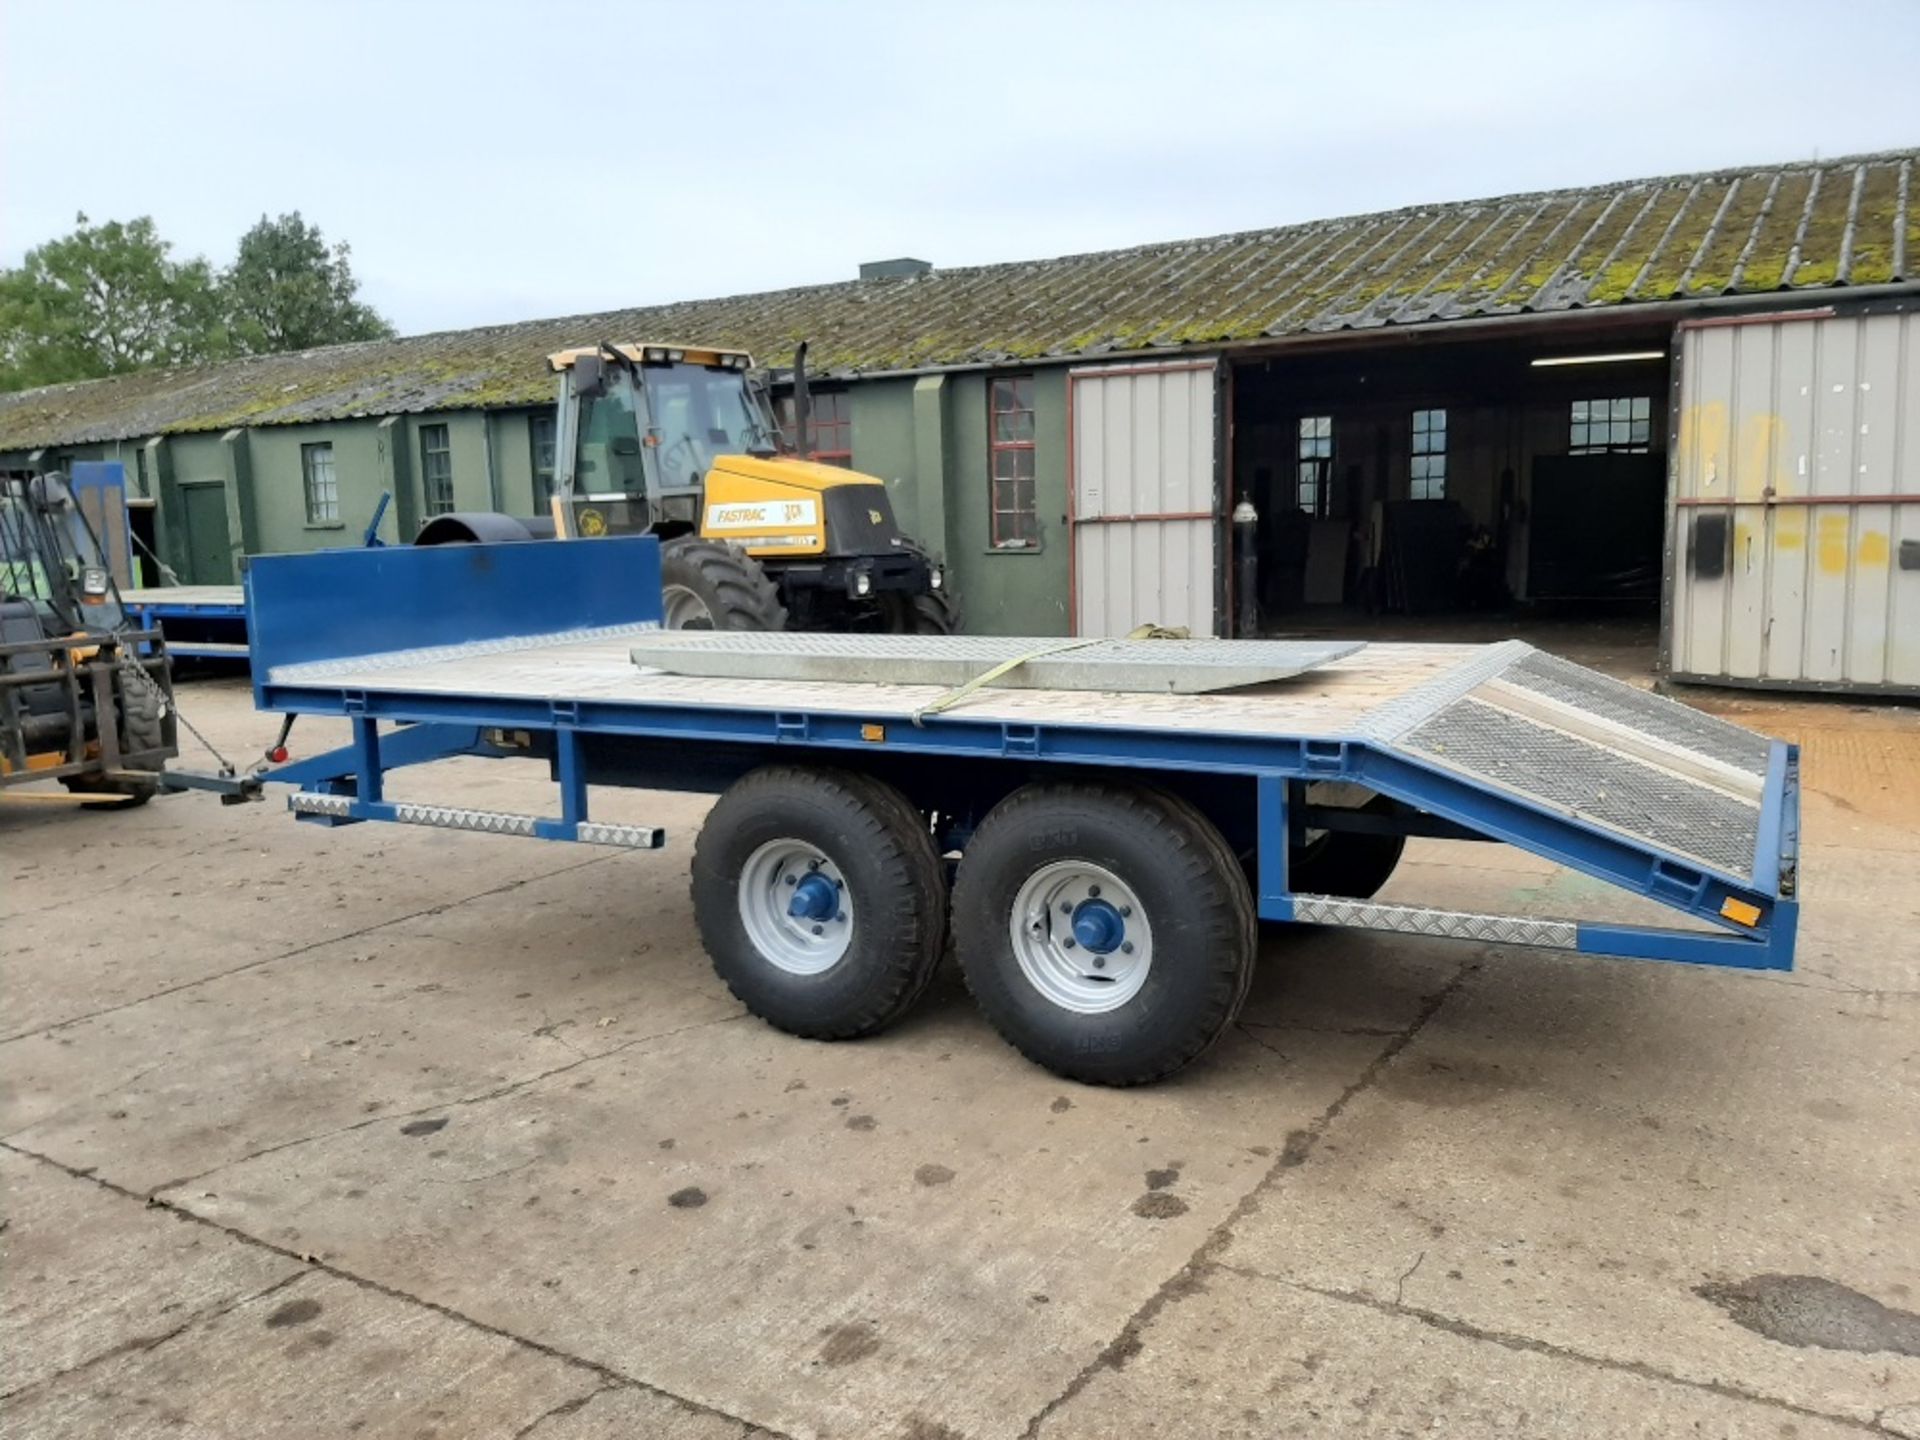 New build beaver tail trailer built on a second hand Salop chassis, - Image 3 of 4